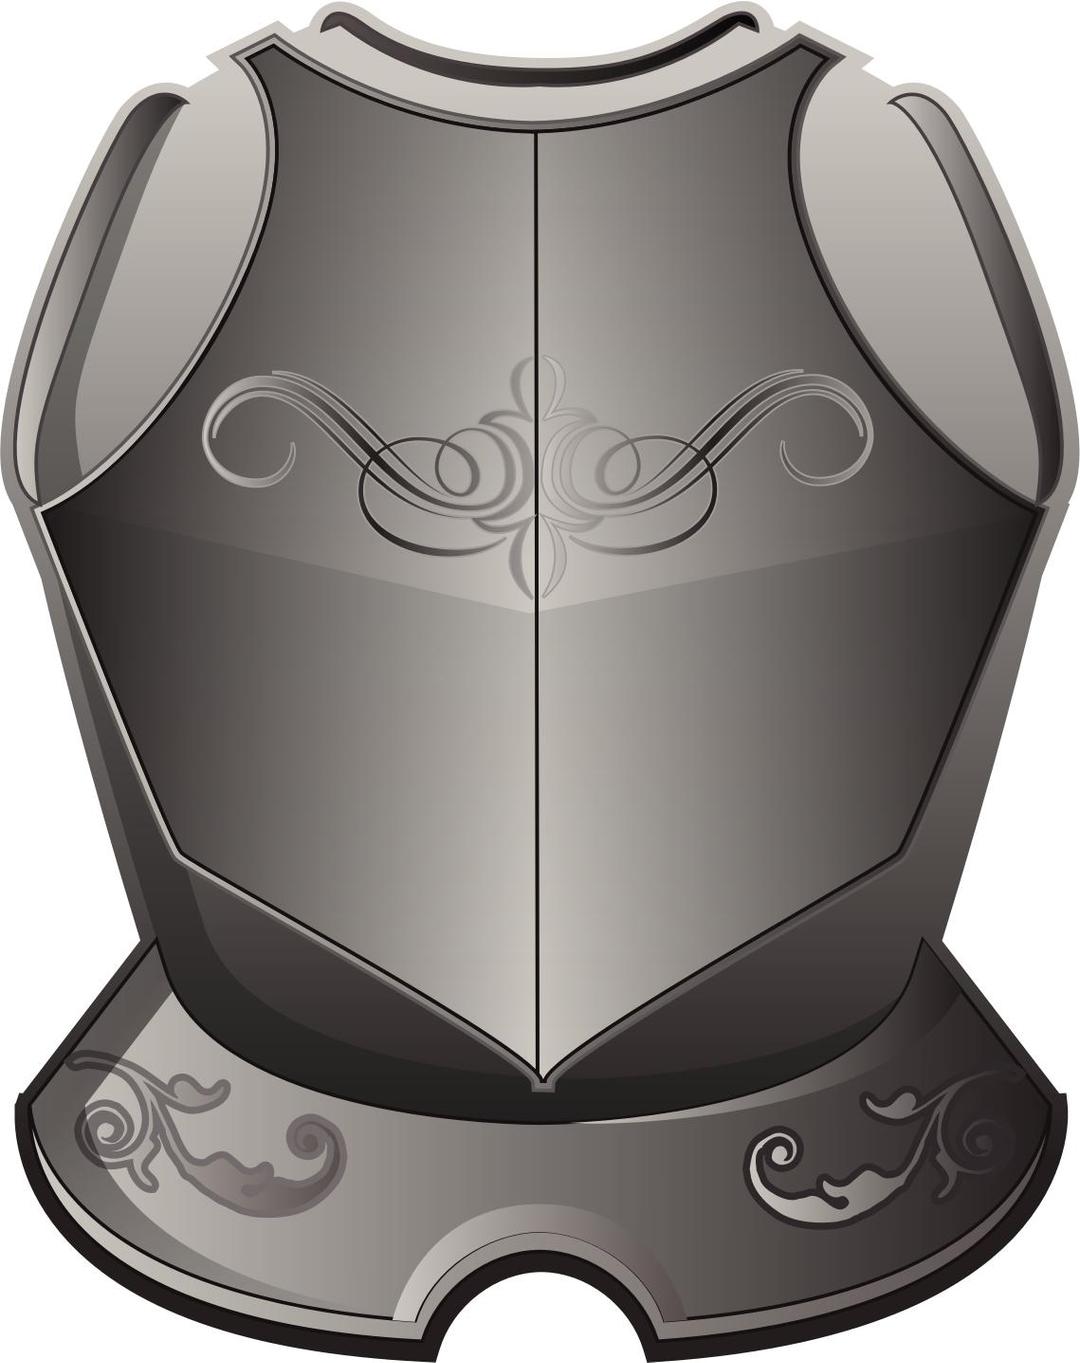 Raseone Armor 3 png transparent